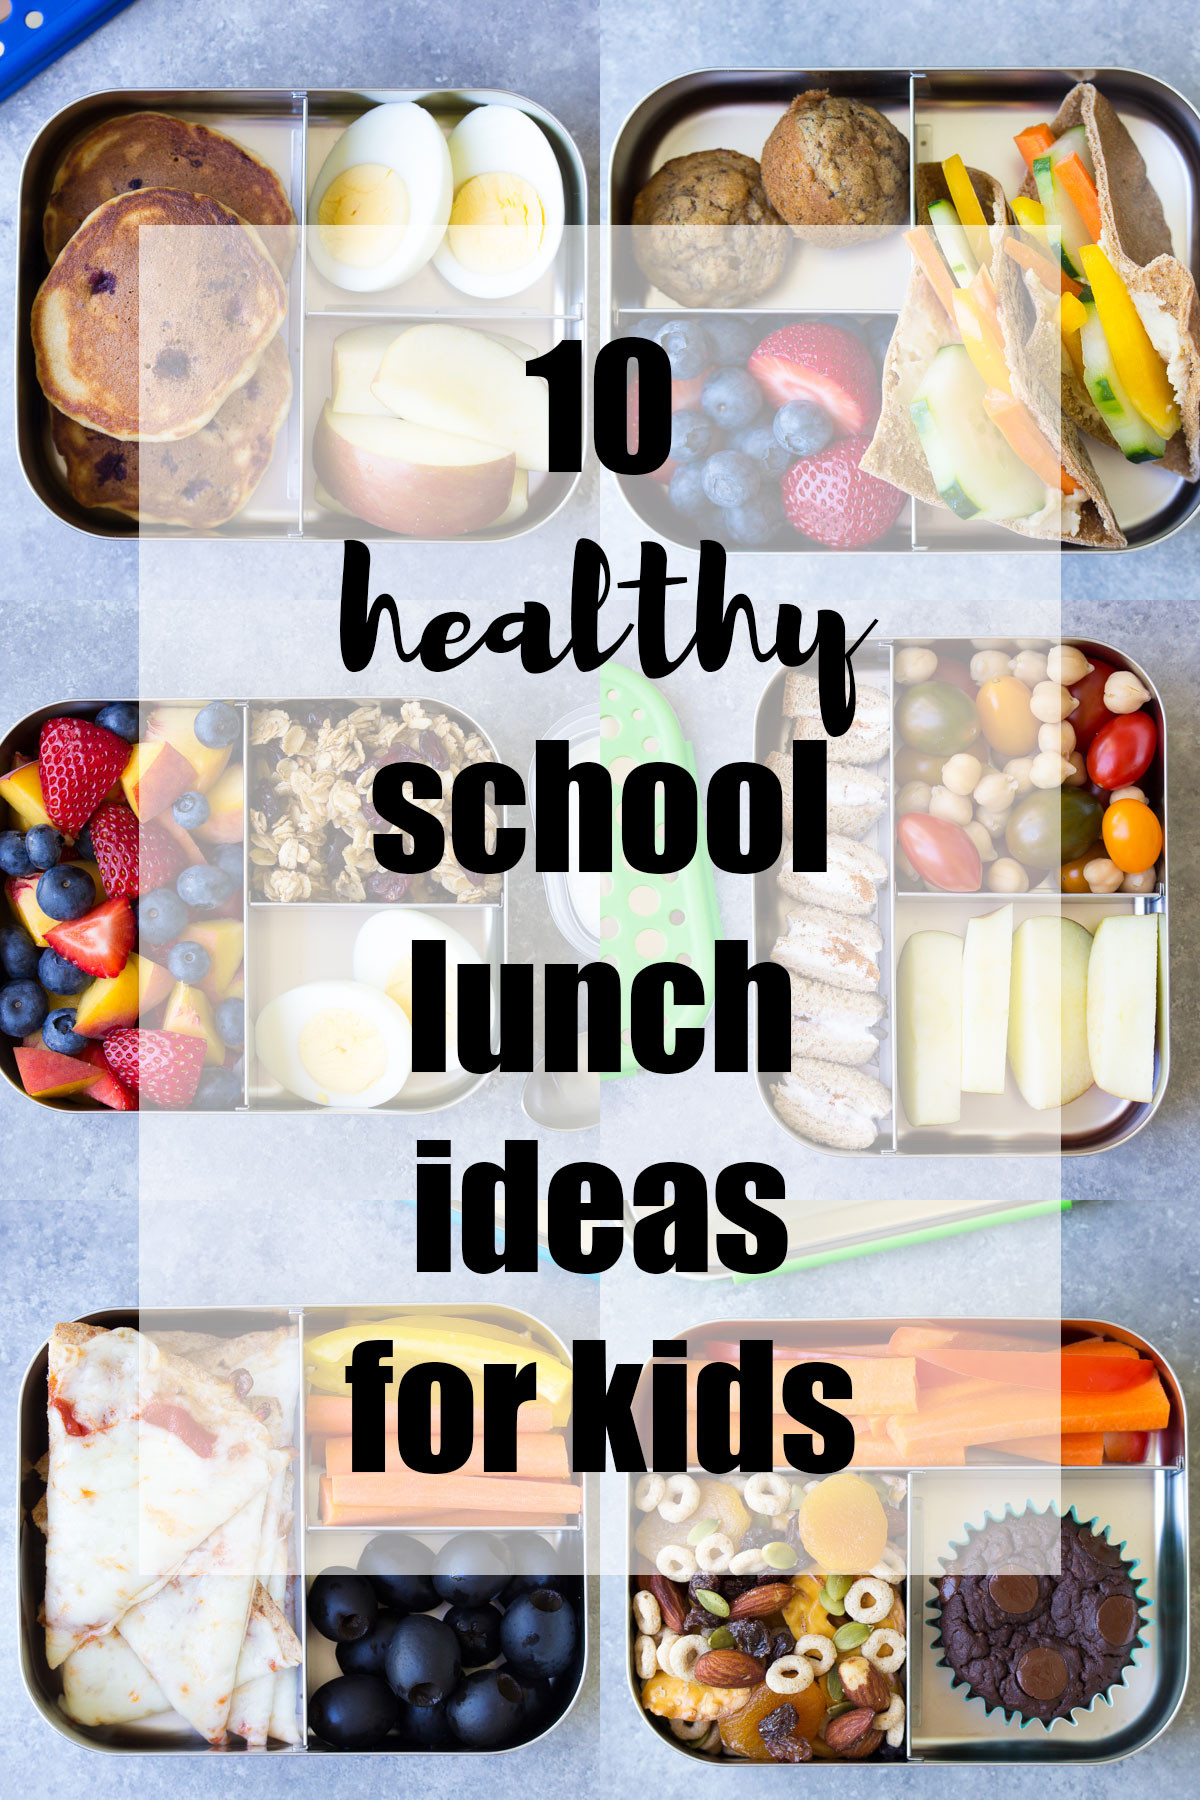 Healthy Snacks For Kids To Take To School
 10 More Healthy Lunch Ideas for Kids for the School Lunch